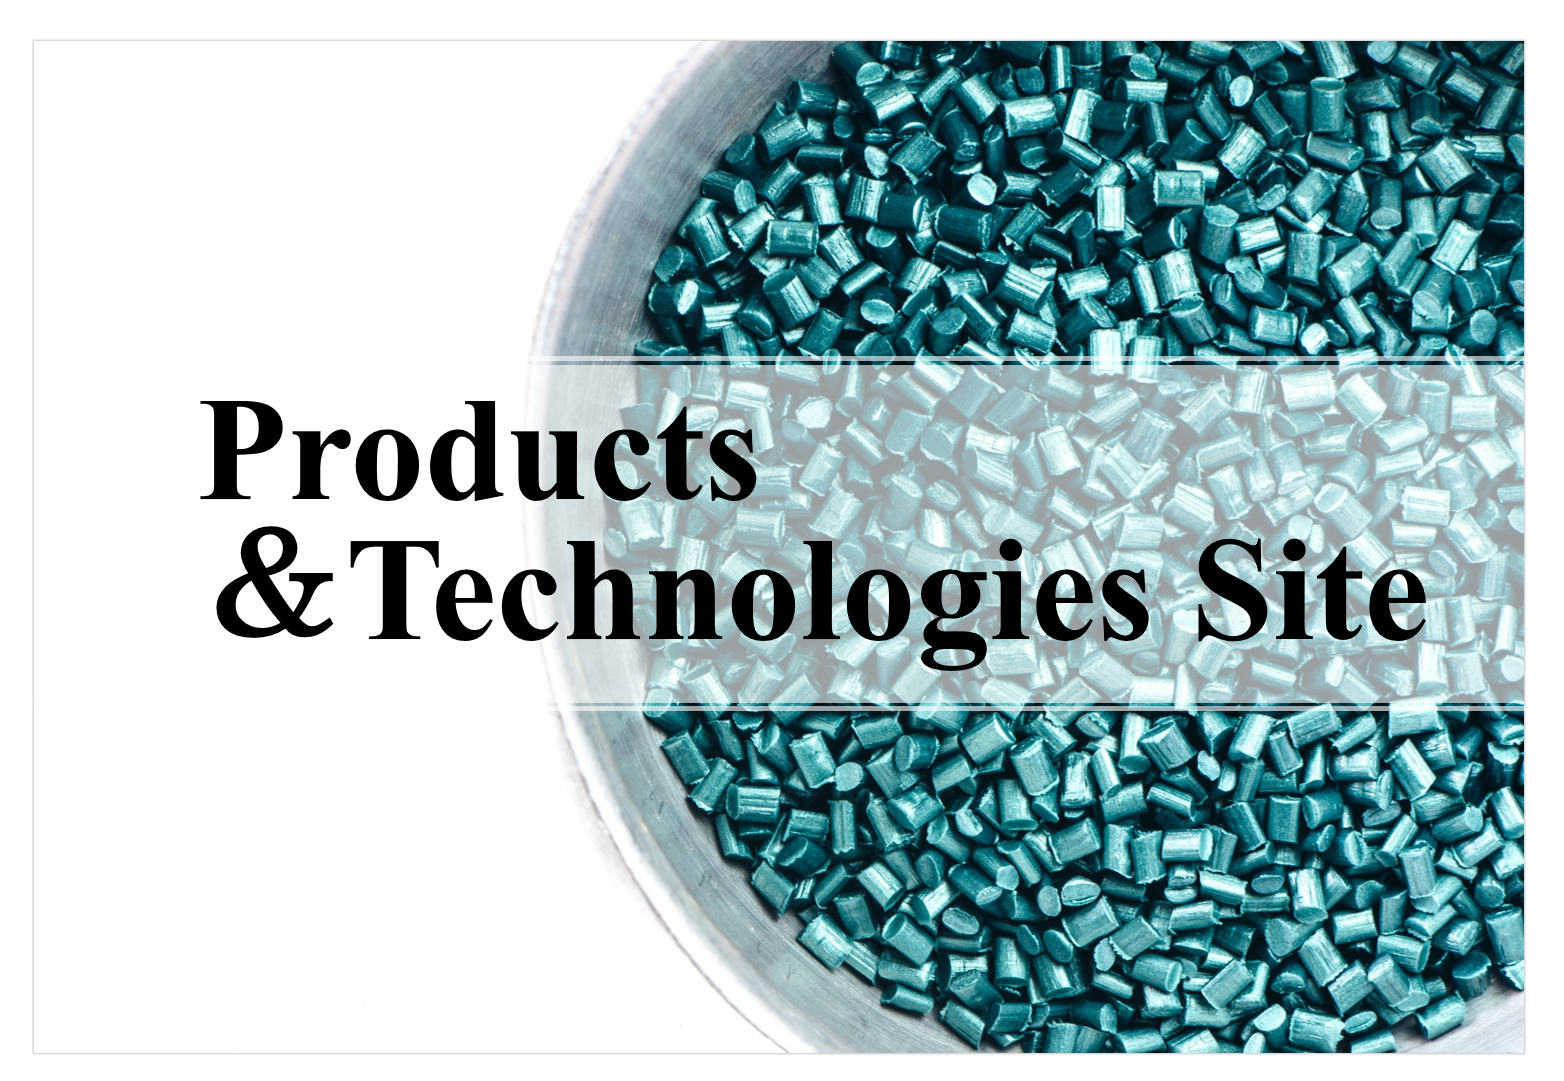 Products and Technologies Site